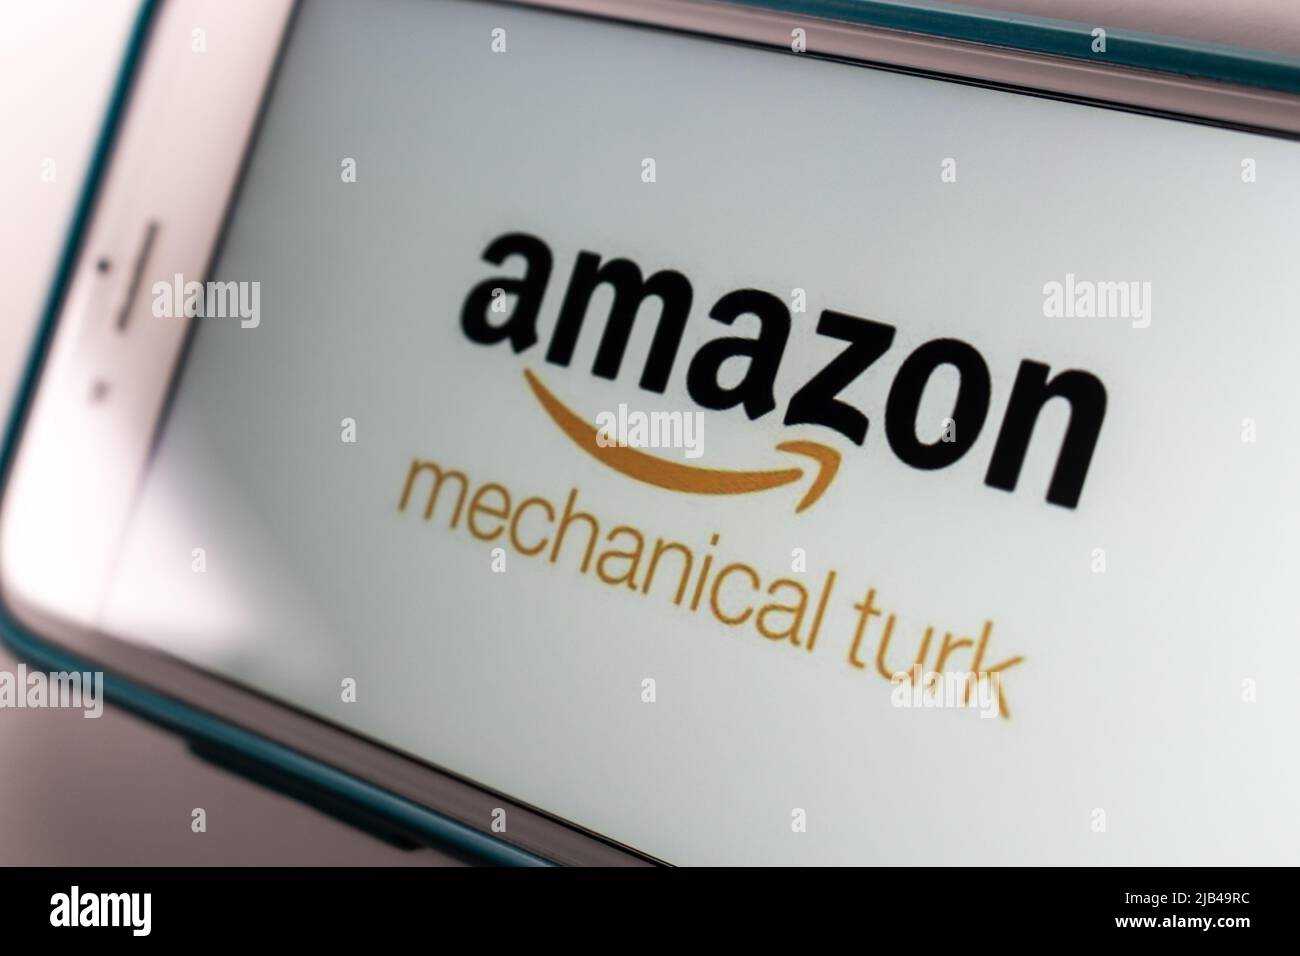 Logo of Amazon Mechanical Turk (MTurk), crowdsourcing website to hire crowdworkers for on-demand tasks that computers are unable to do, on iPhone Stock Photo